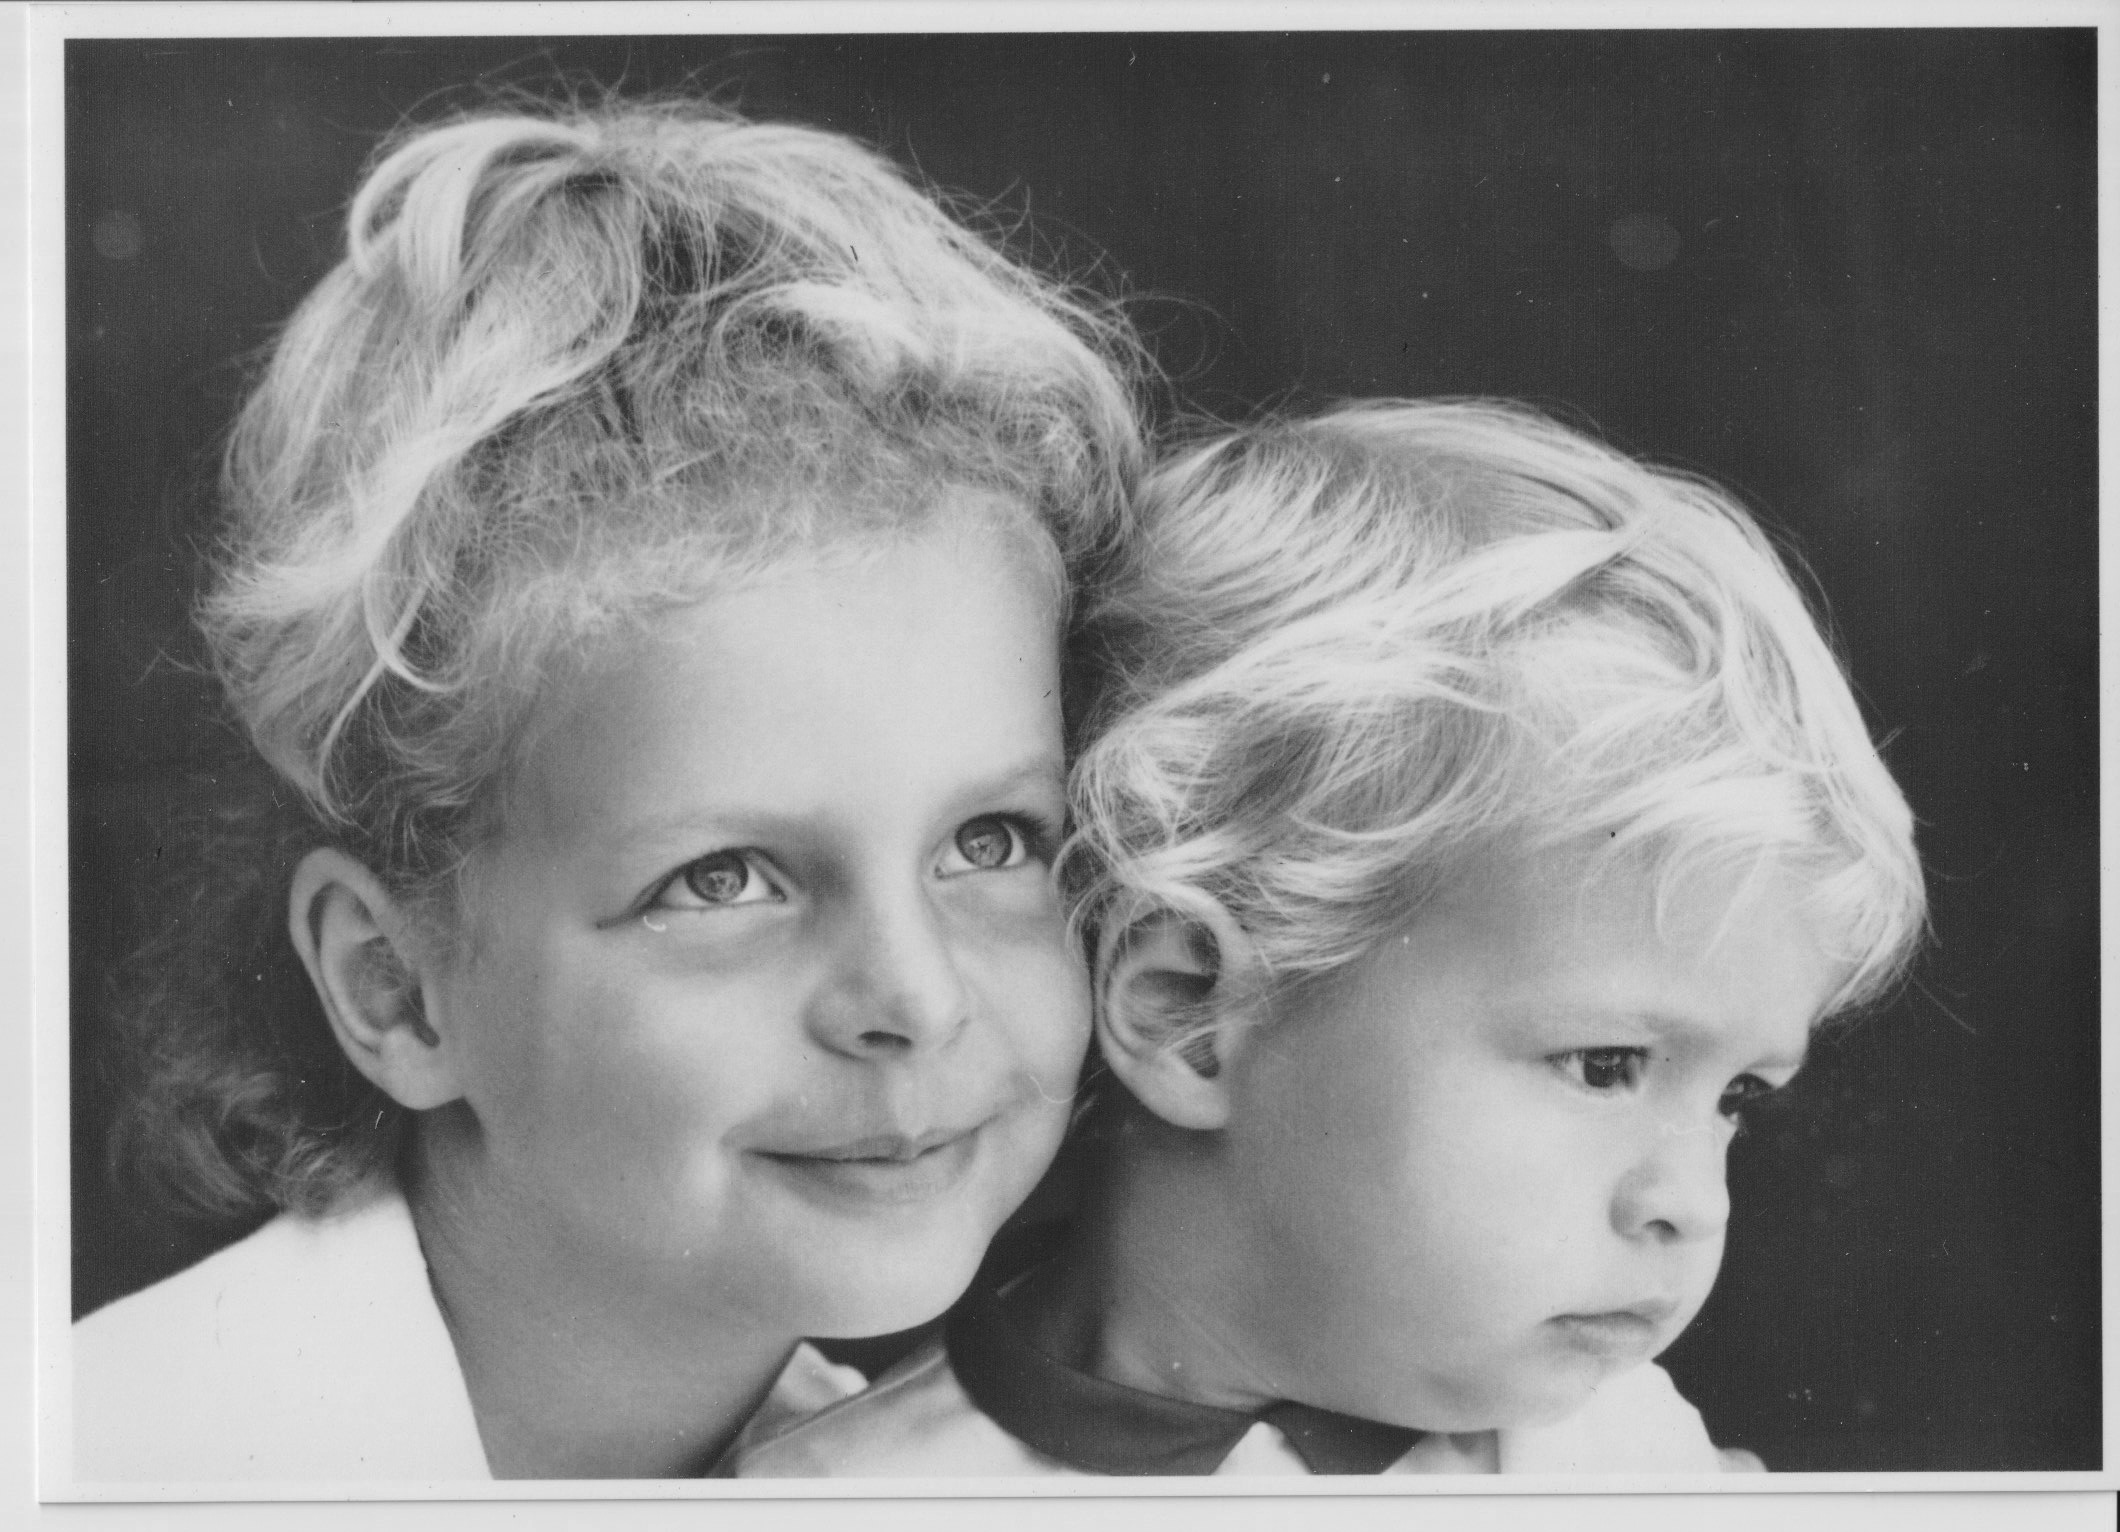 Danda and her brother, photographed by her father